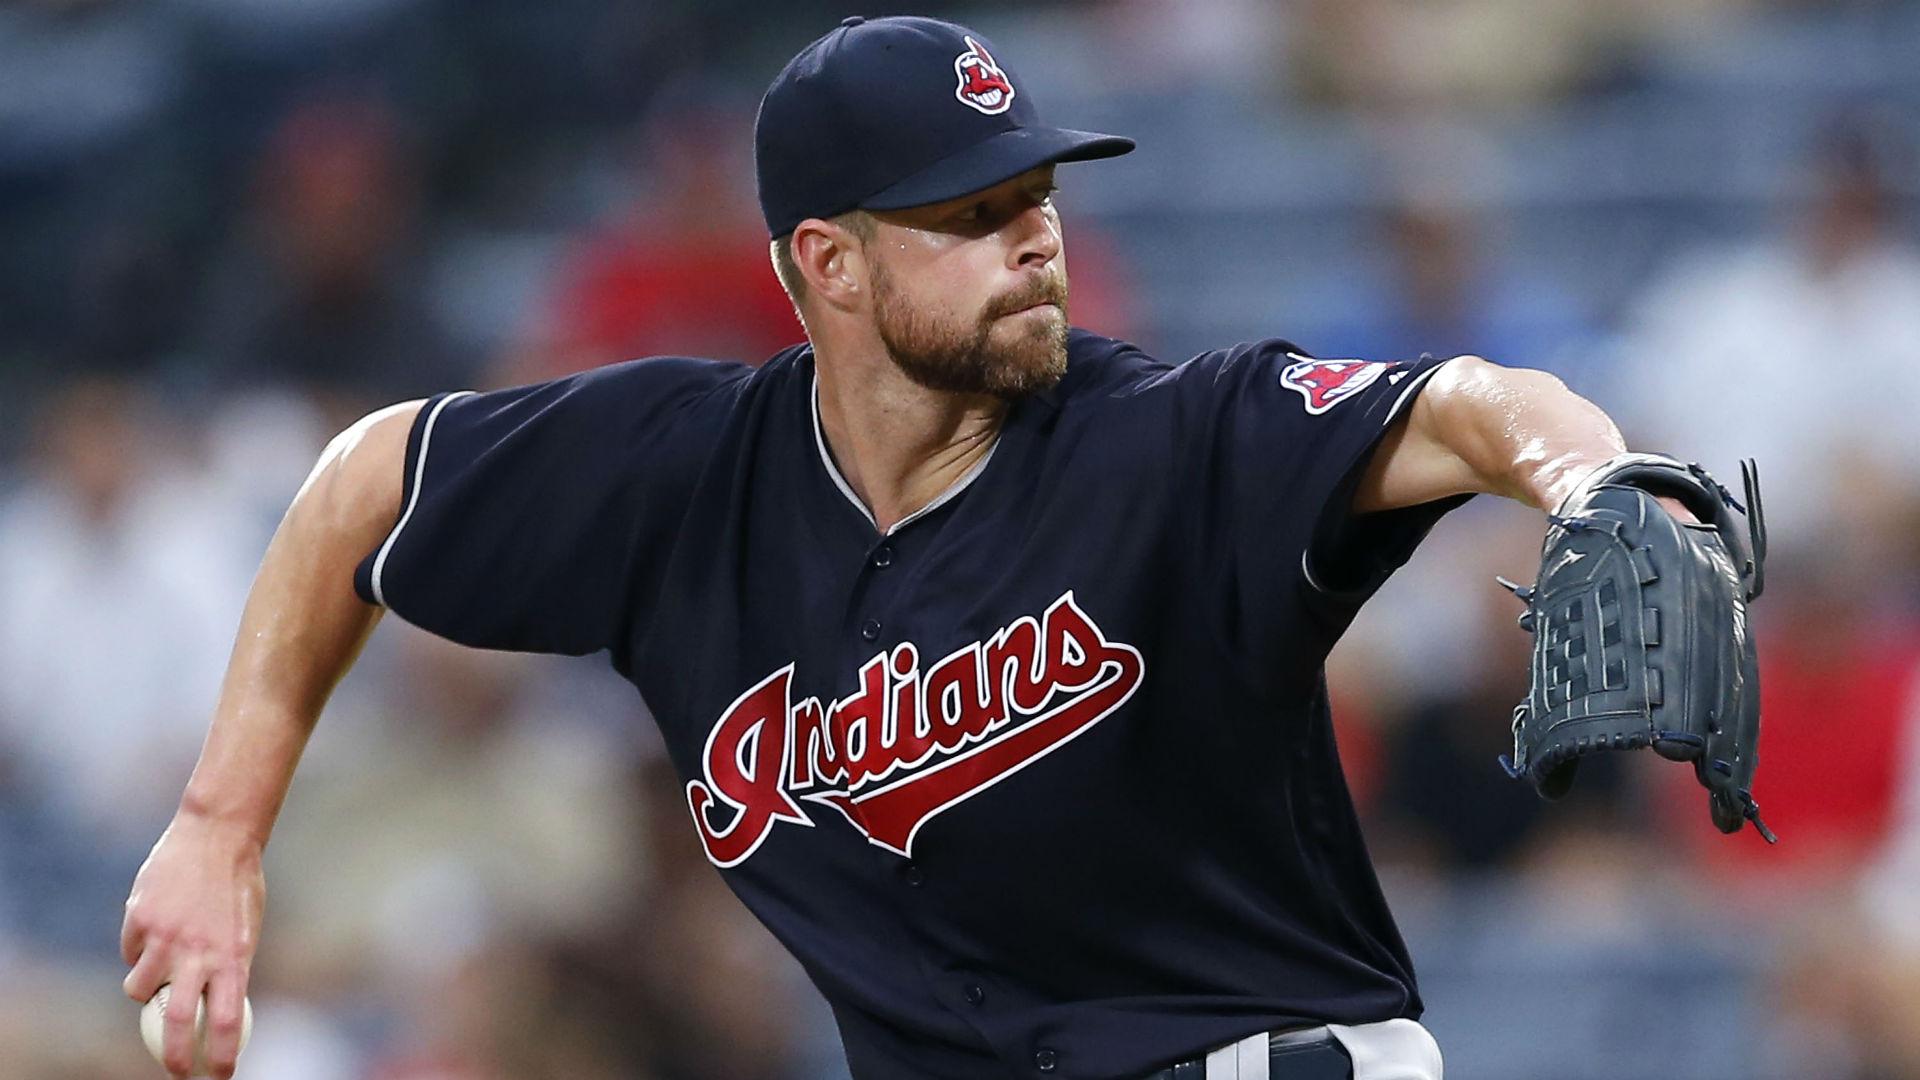 Corey Kluber Controls His Own Destiny. Waiting For Next Year